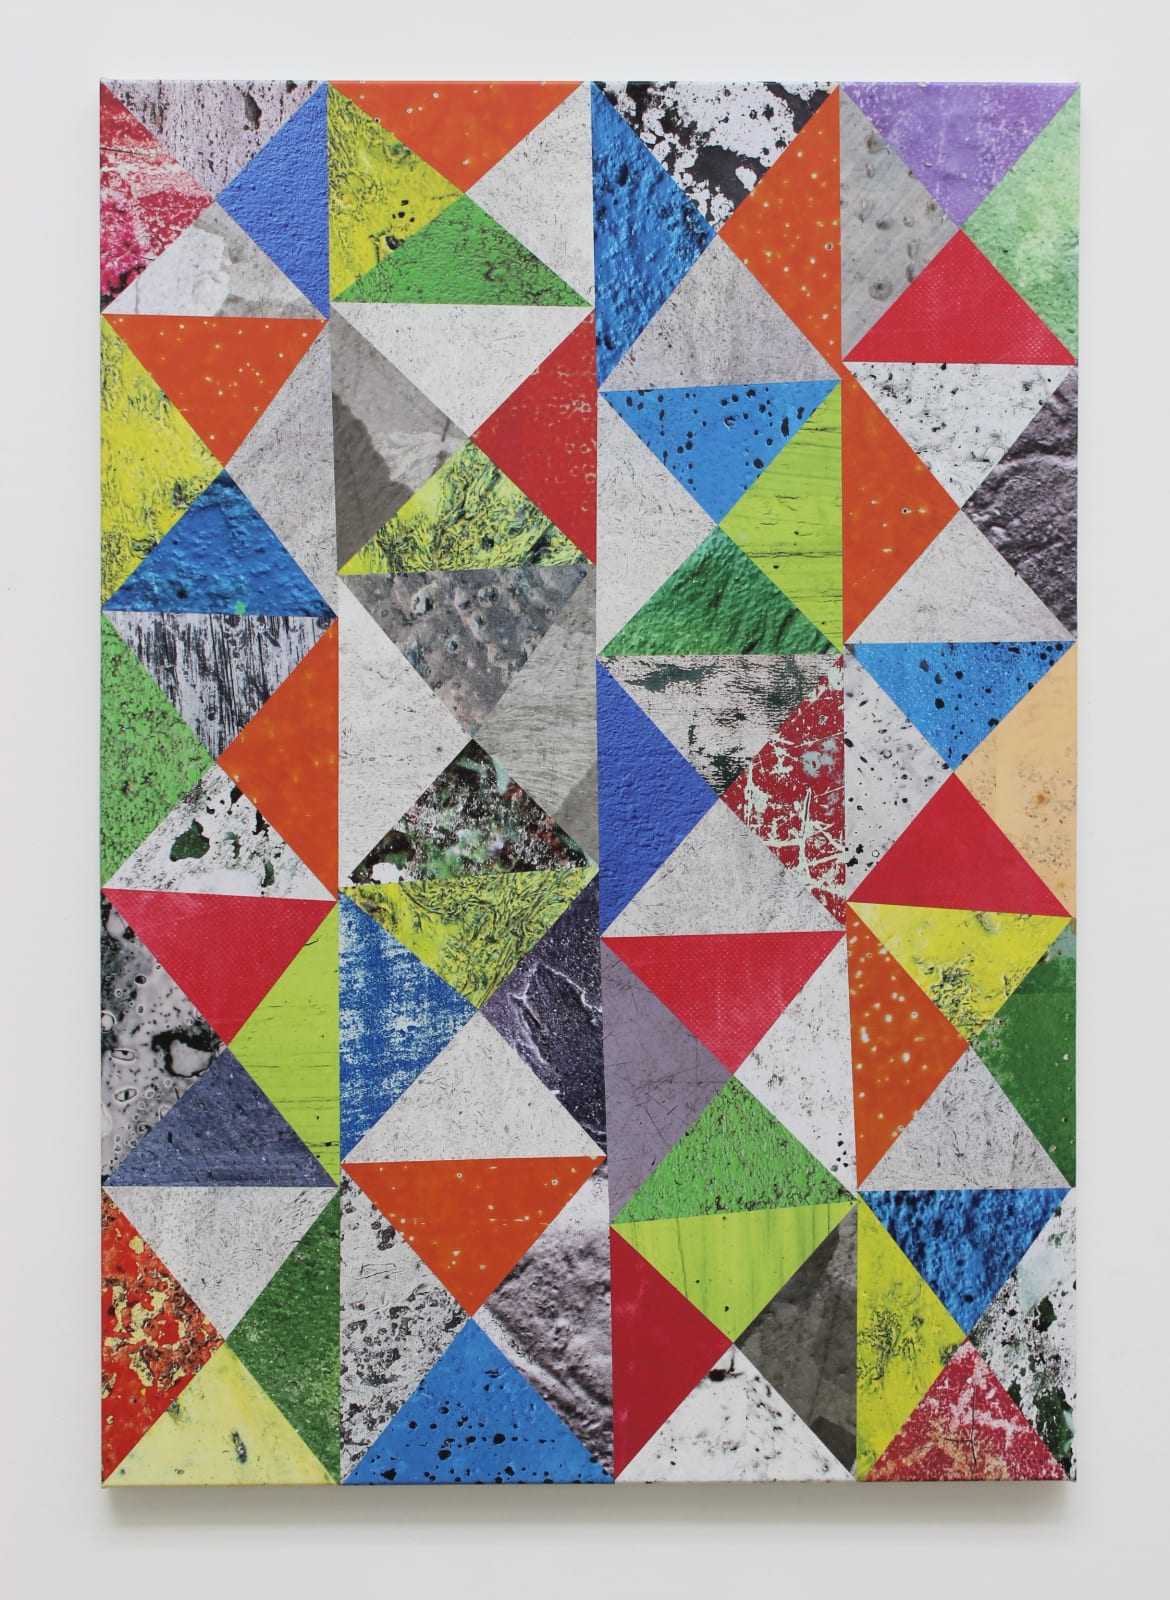 Louis Cameron, BRLN 51, 2022, 165 × 115 cm / 65 × 45 1/4 in, Paper on canvas, collage